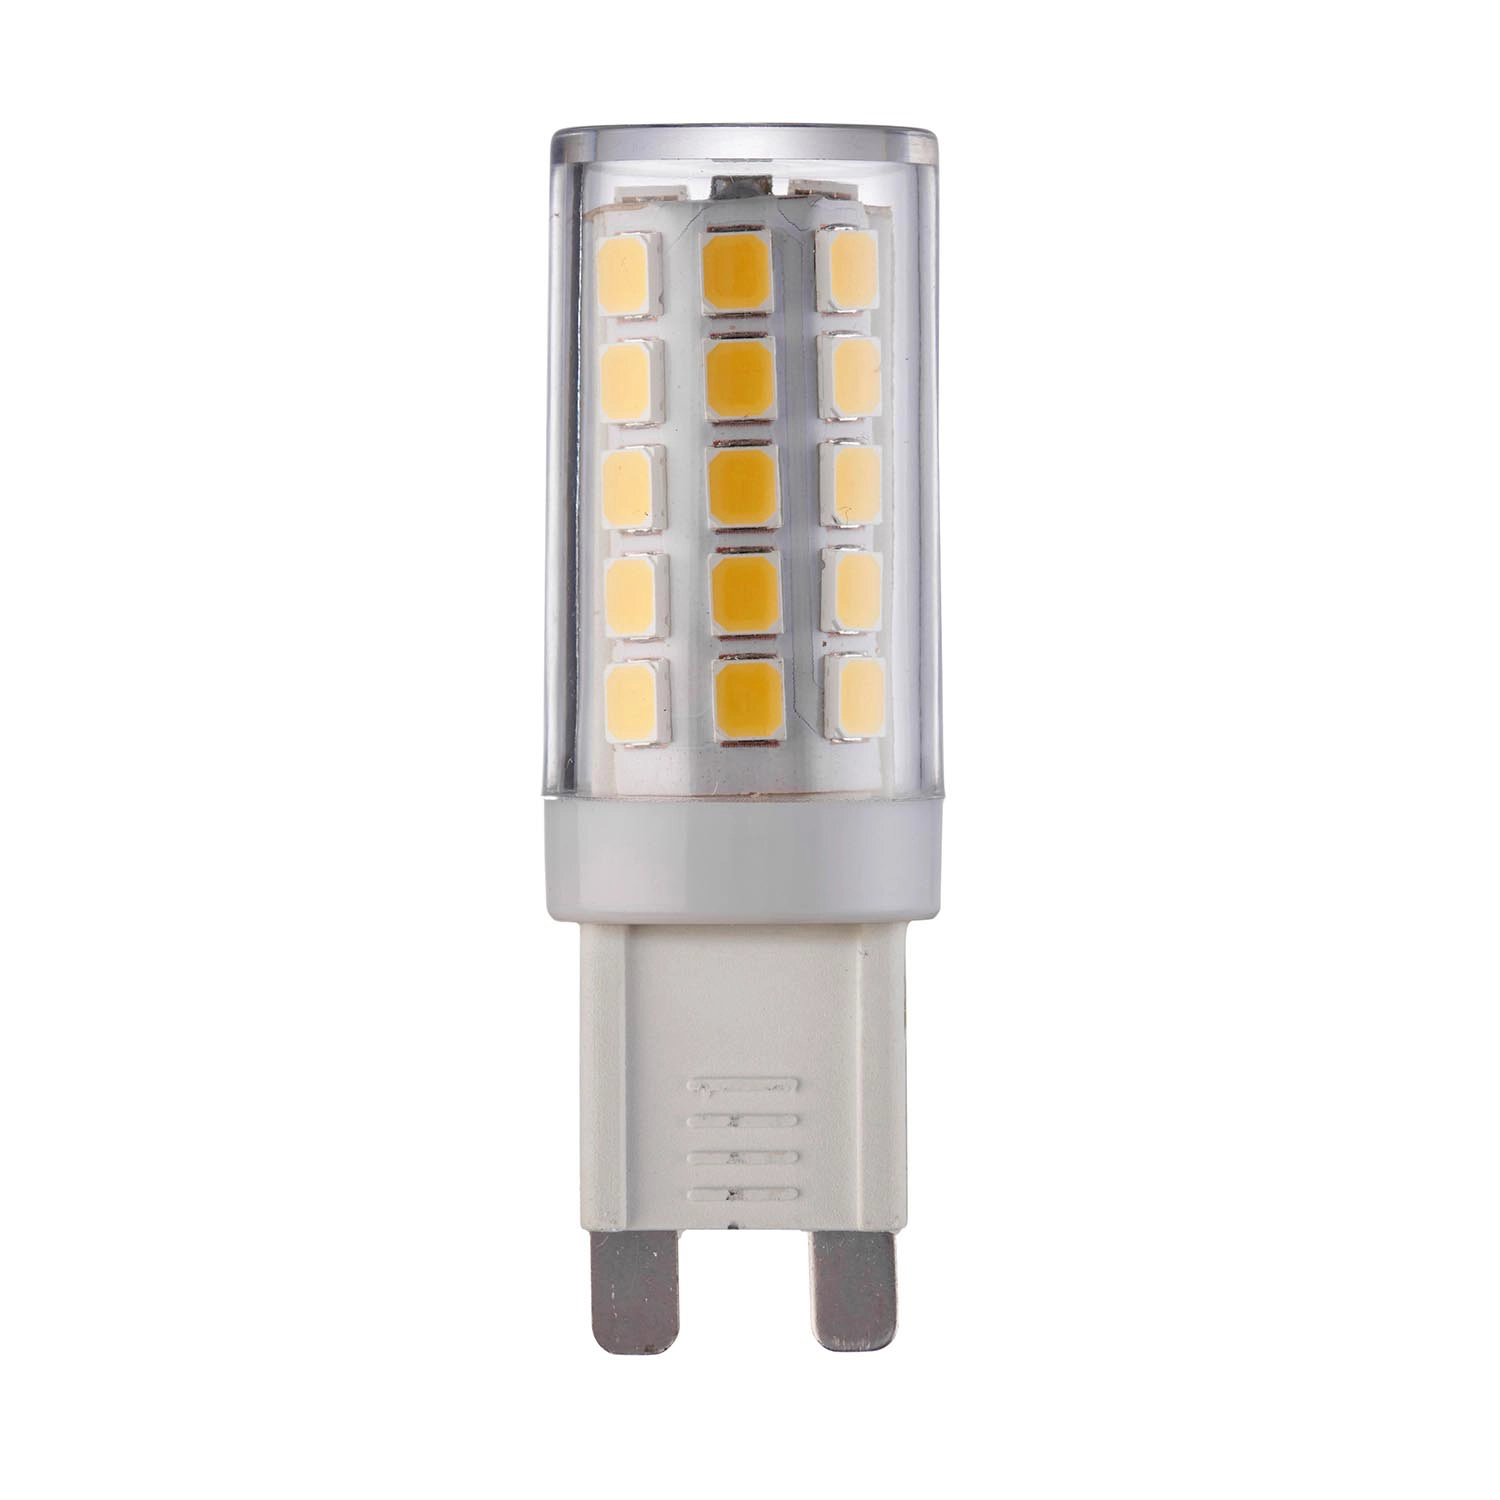 National Lighting | 3.5W SMD LED G9 Lamp in cool white - 400lm - not dimmable | National Lighting® Online Shop